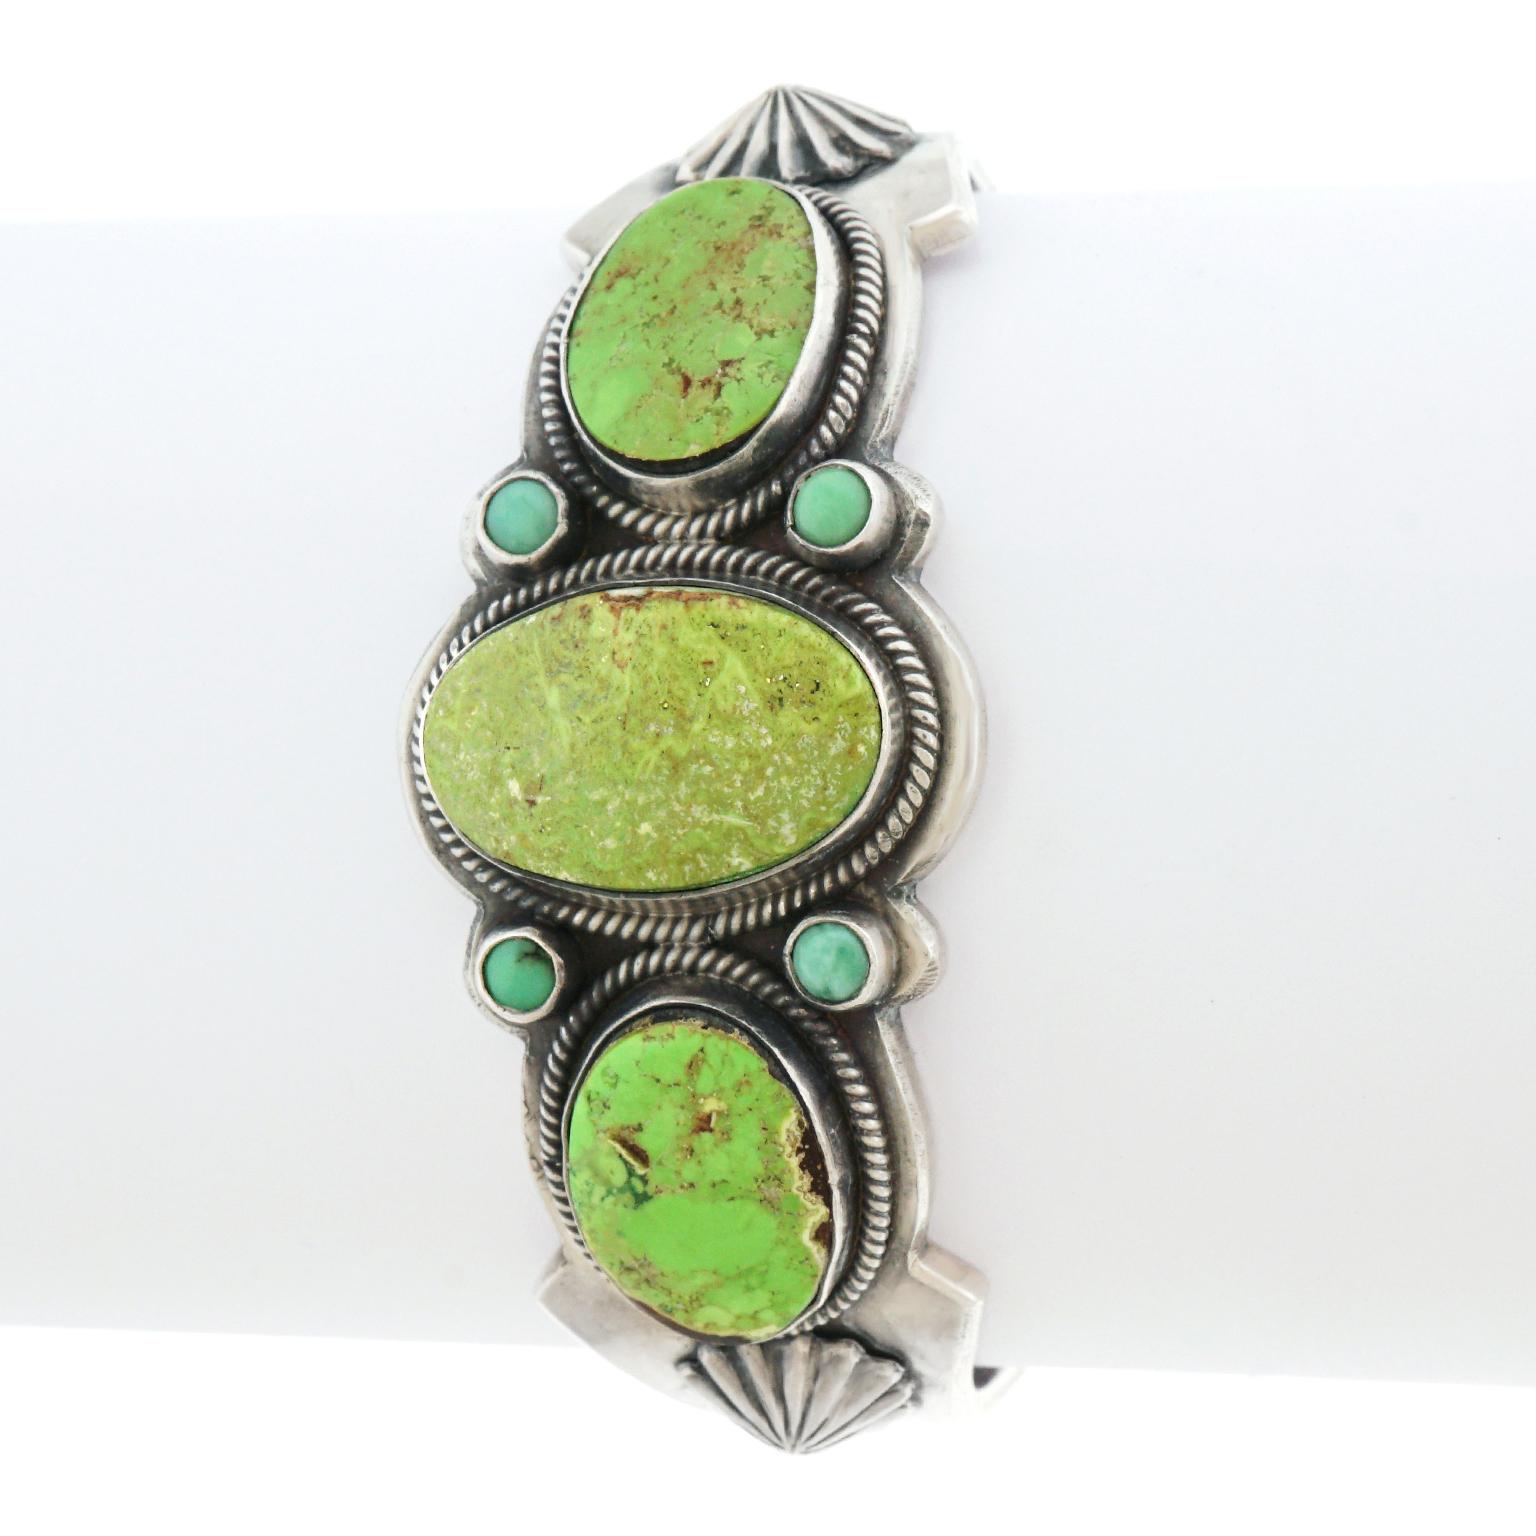 Women's or Men's Green Turquoise Cuff Bracelet by David Lister, Navajo